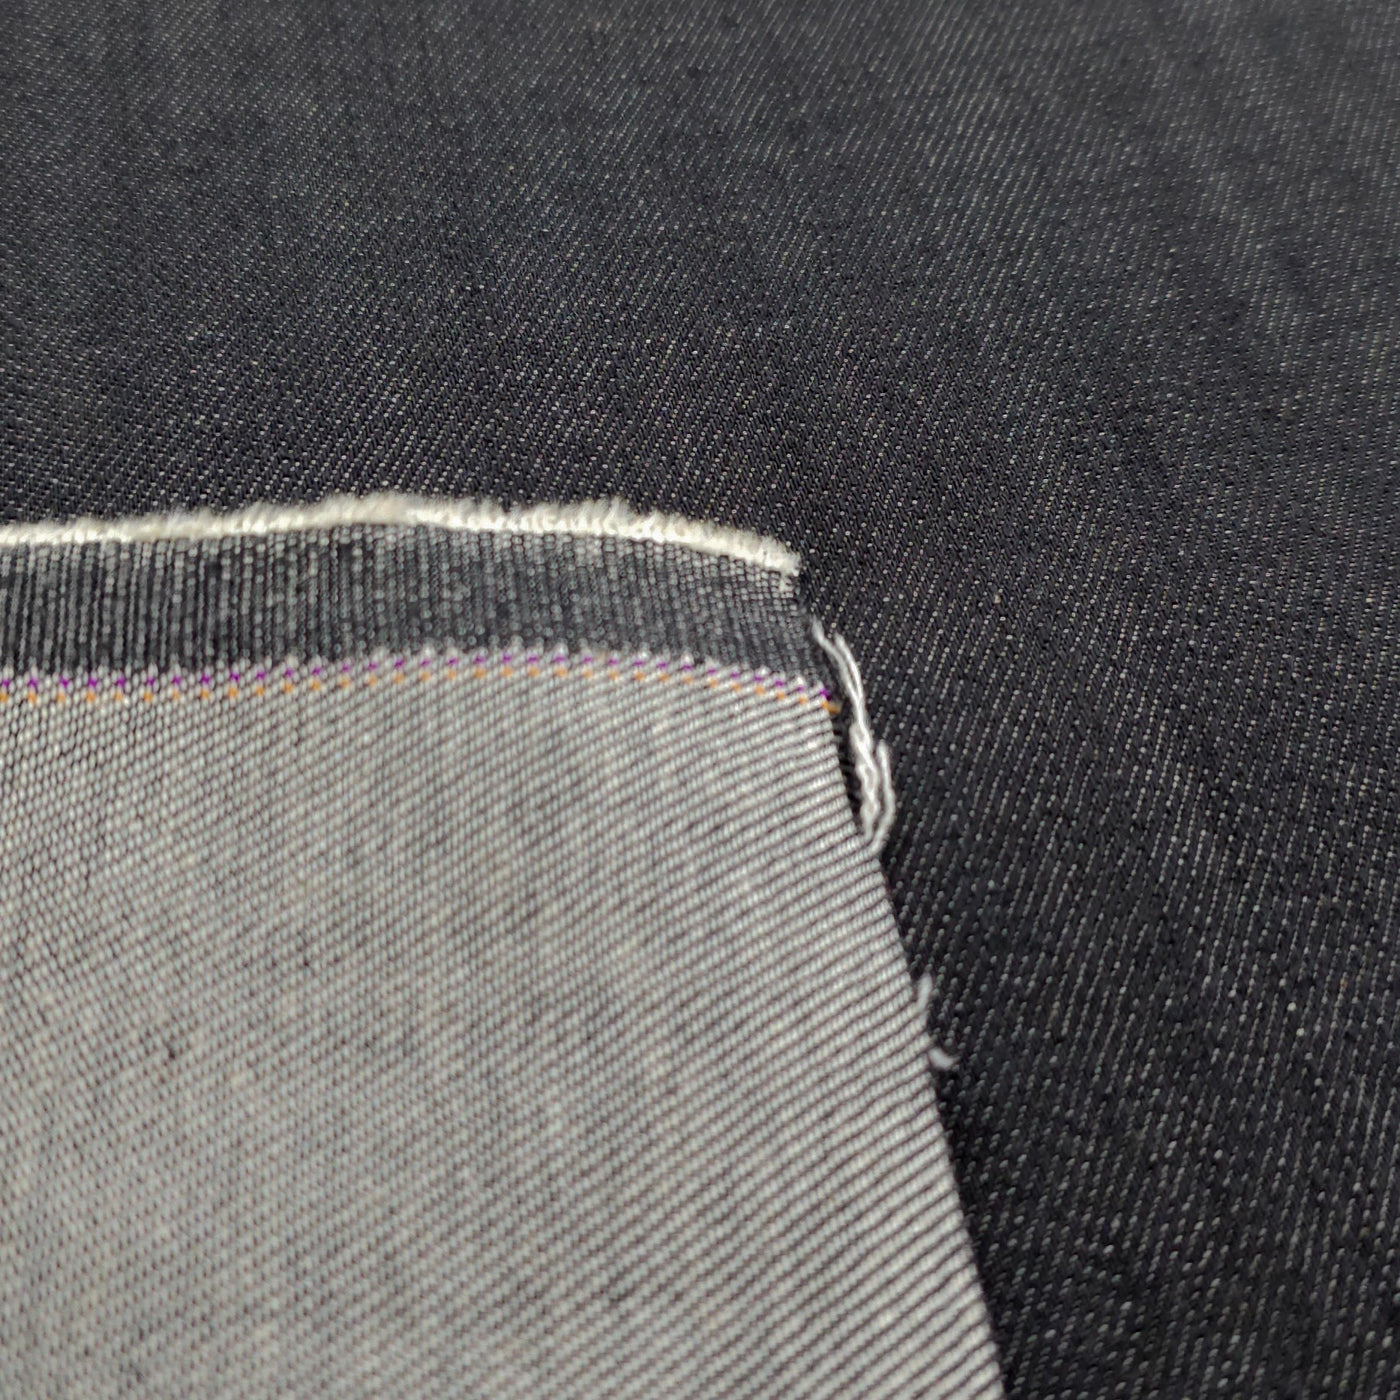 Cotton Denim | Charcoal | 110 cm | END OF ROLL